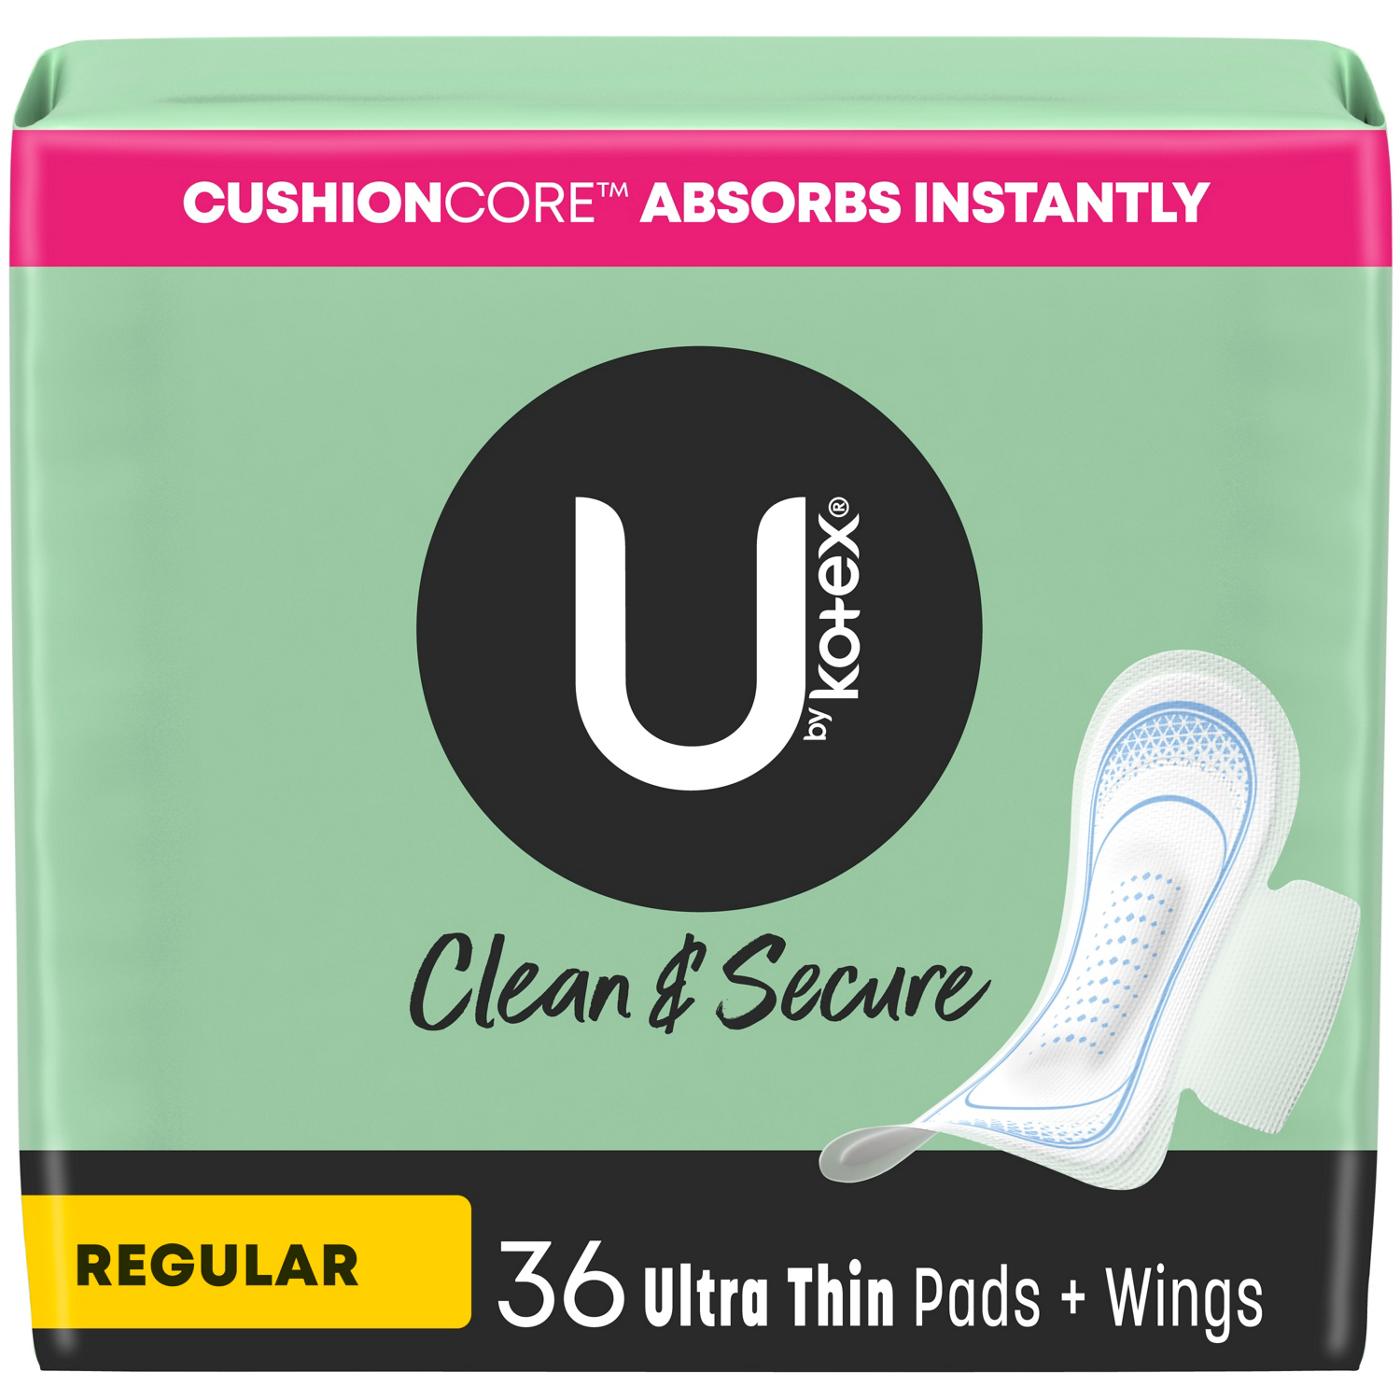 U by Kotex Clean & Secure Ultra Thin Pads with Wings - Regular Absorbency; image 1 of 7